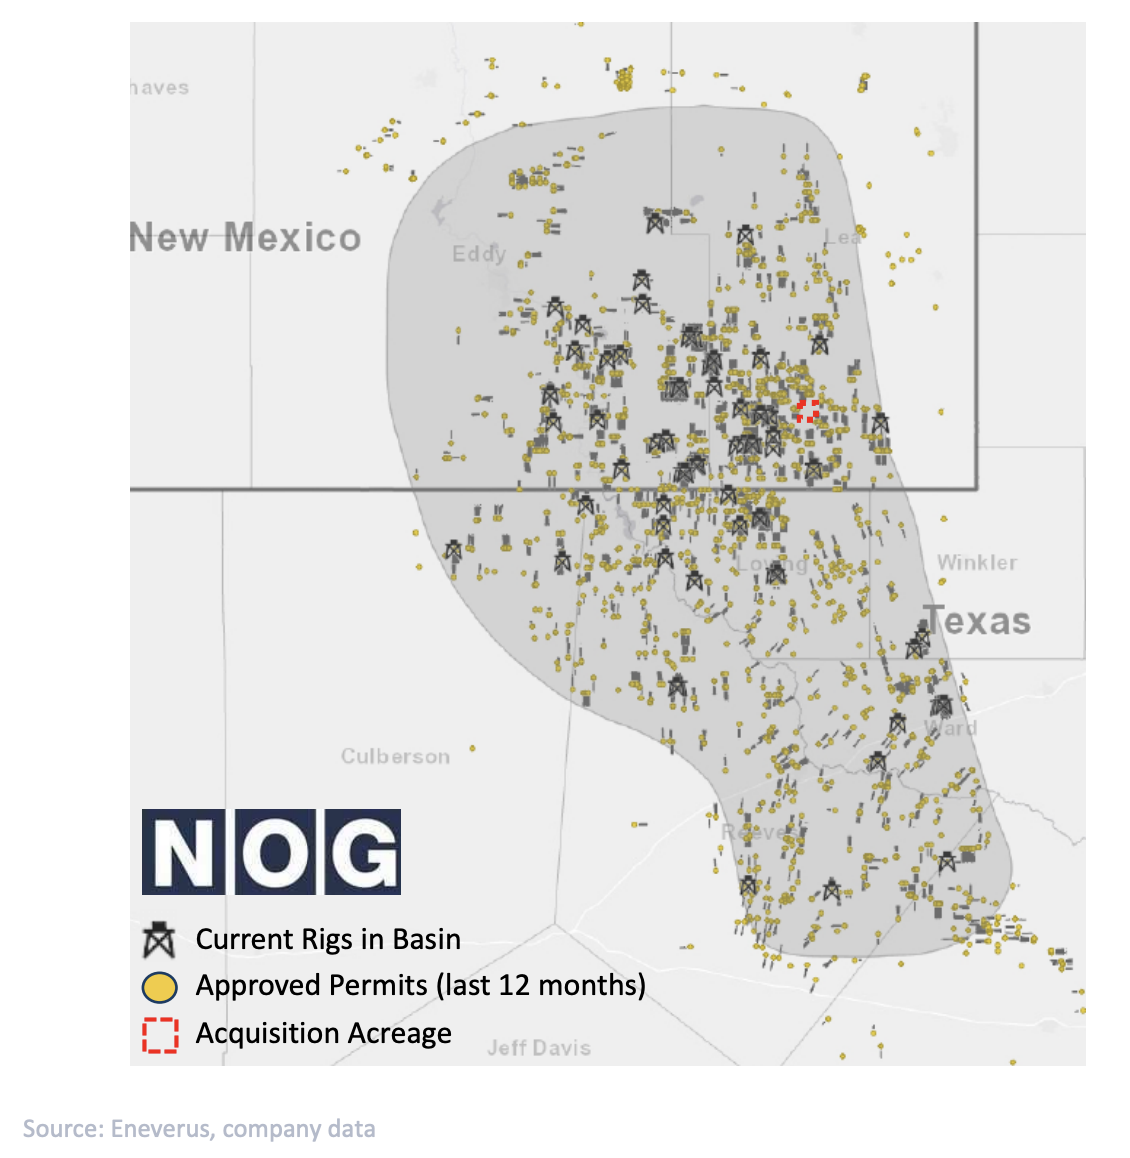 Northern Oil and Gas Map of Permian Basin Acquisition Acreage